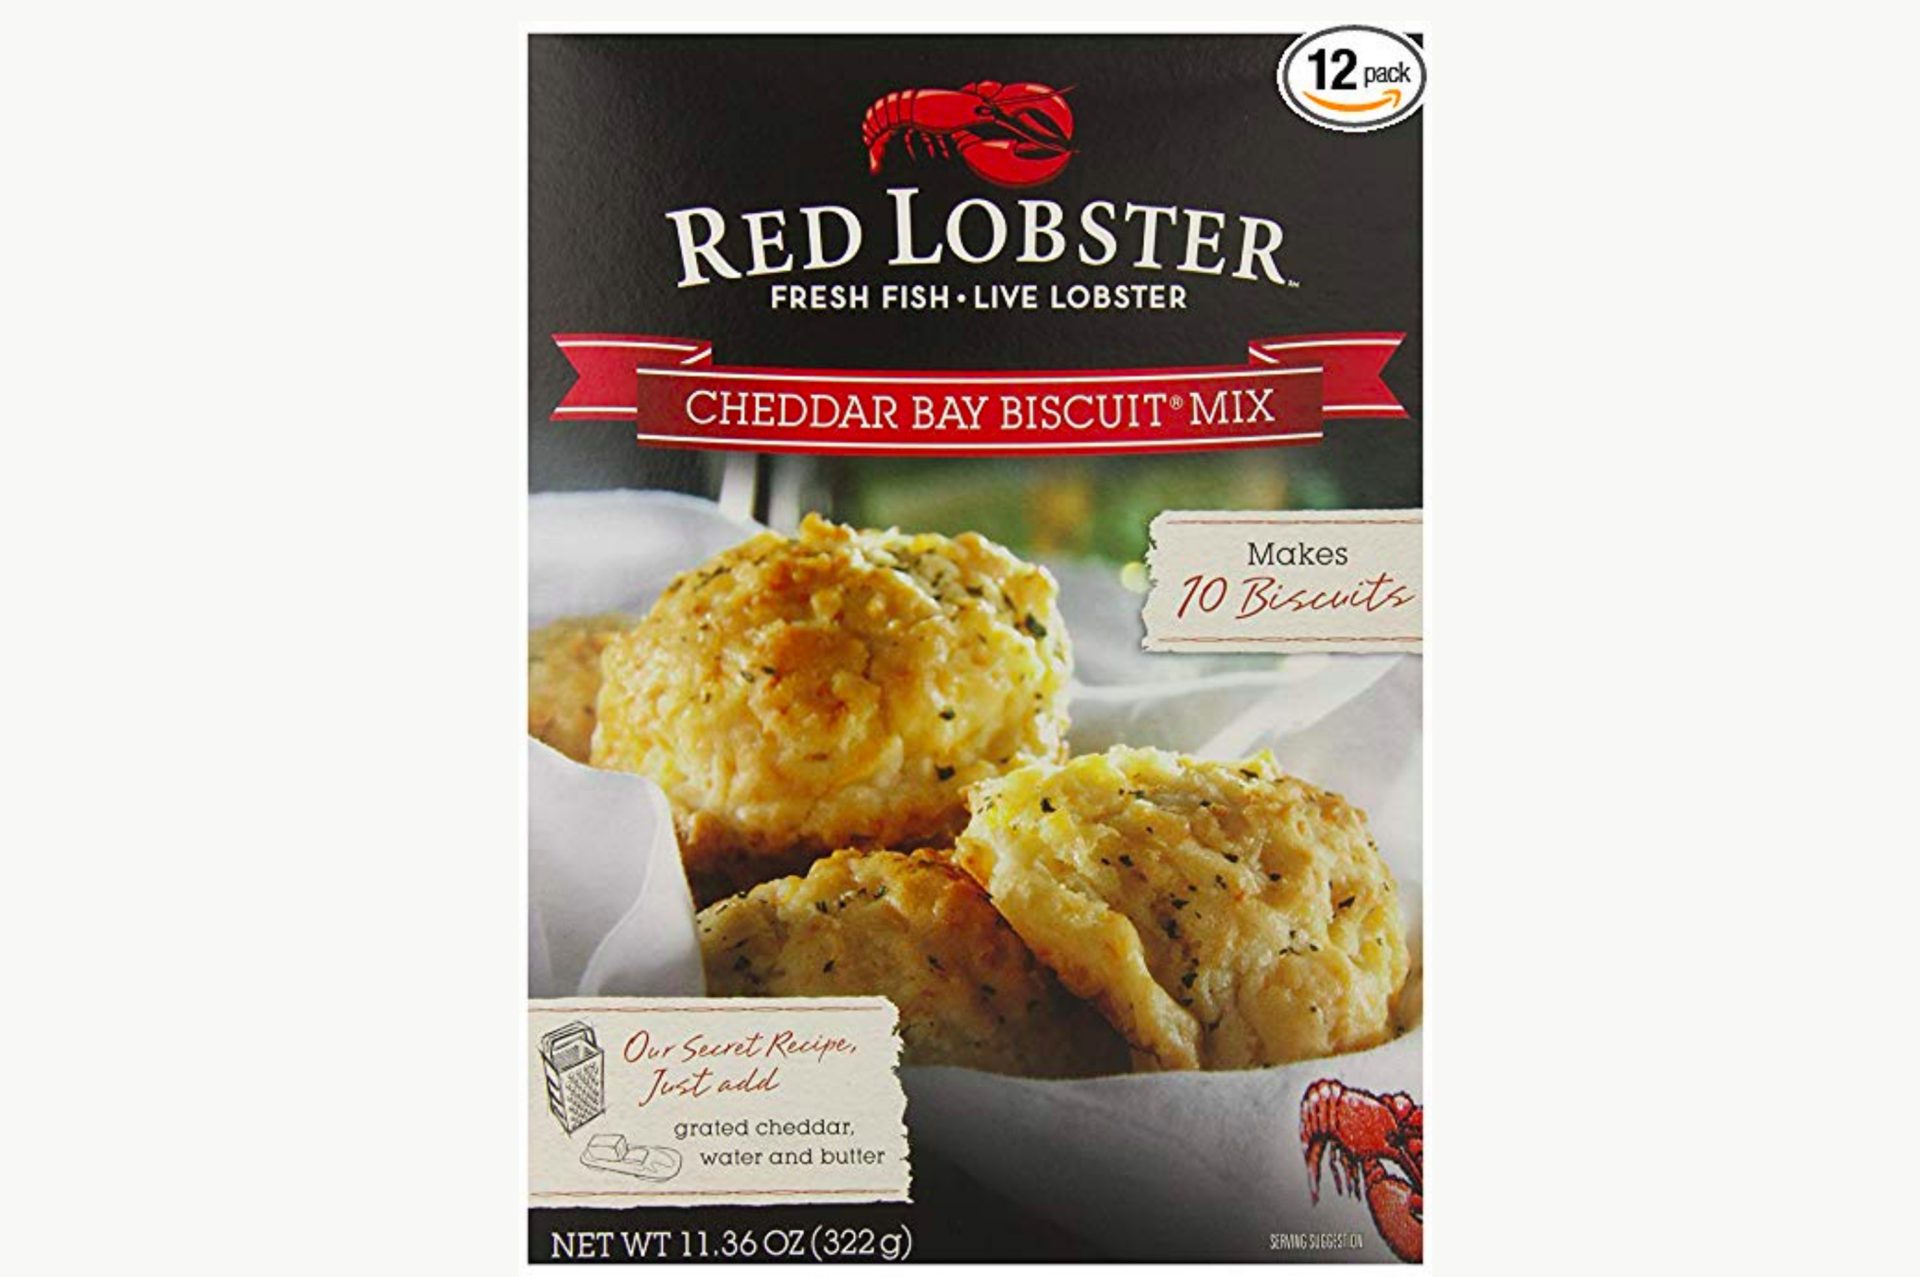 red lobster biscuit mix calories